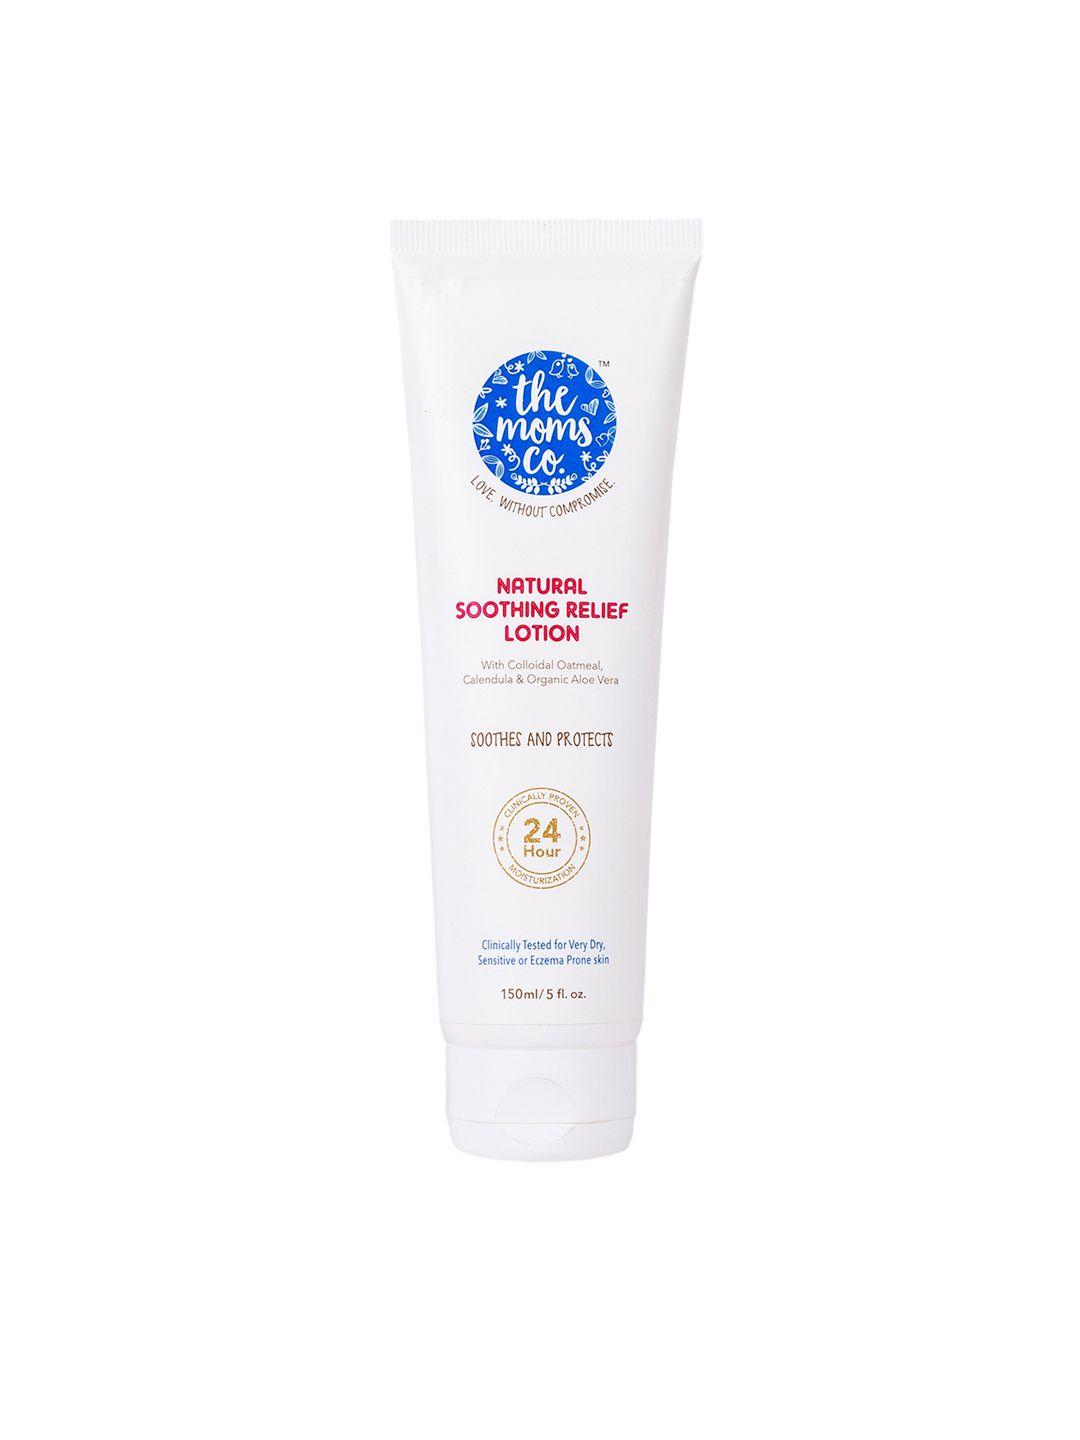 the moms co. unisex natural soothing relief body lotion 150ml